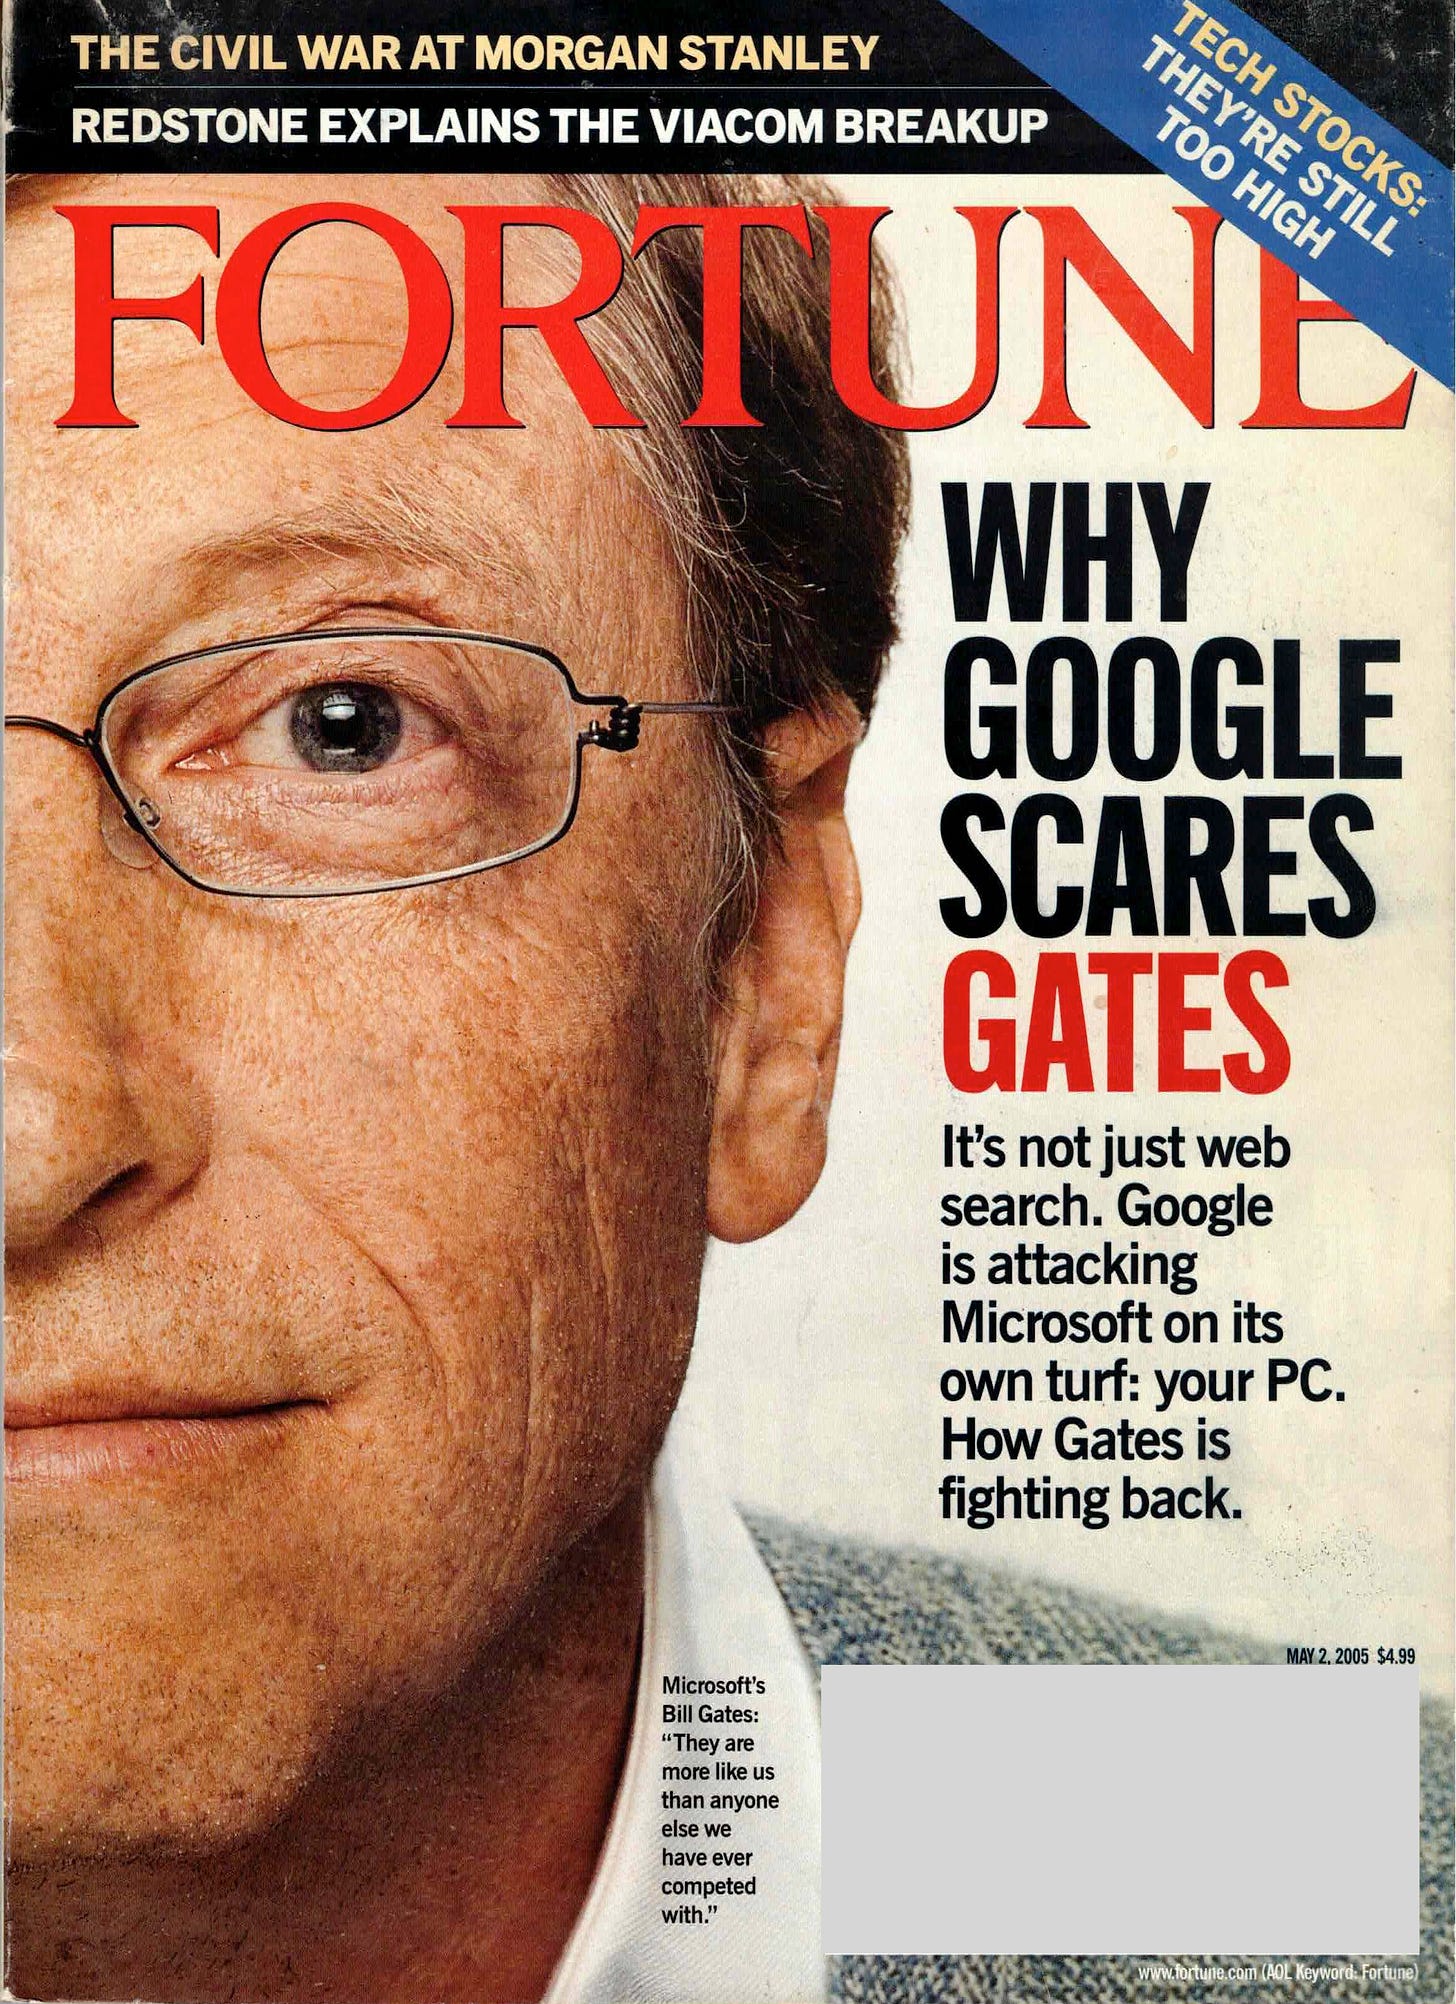 WHY GOOGLE SCARES GATES It's not just web search. Google is attacking Microsoft on its own turf: your PC. How Gates is fighting back. MAY 2, 2005 $4.99 Microsoft's Bill Gates: "They are more like us than anyone else we have ever competed with."